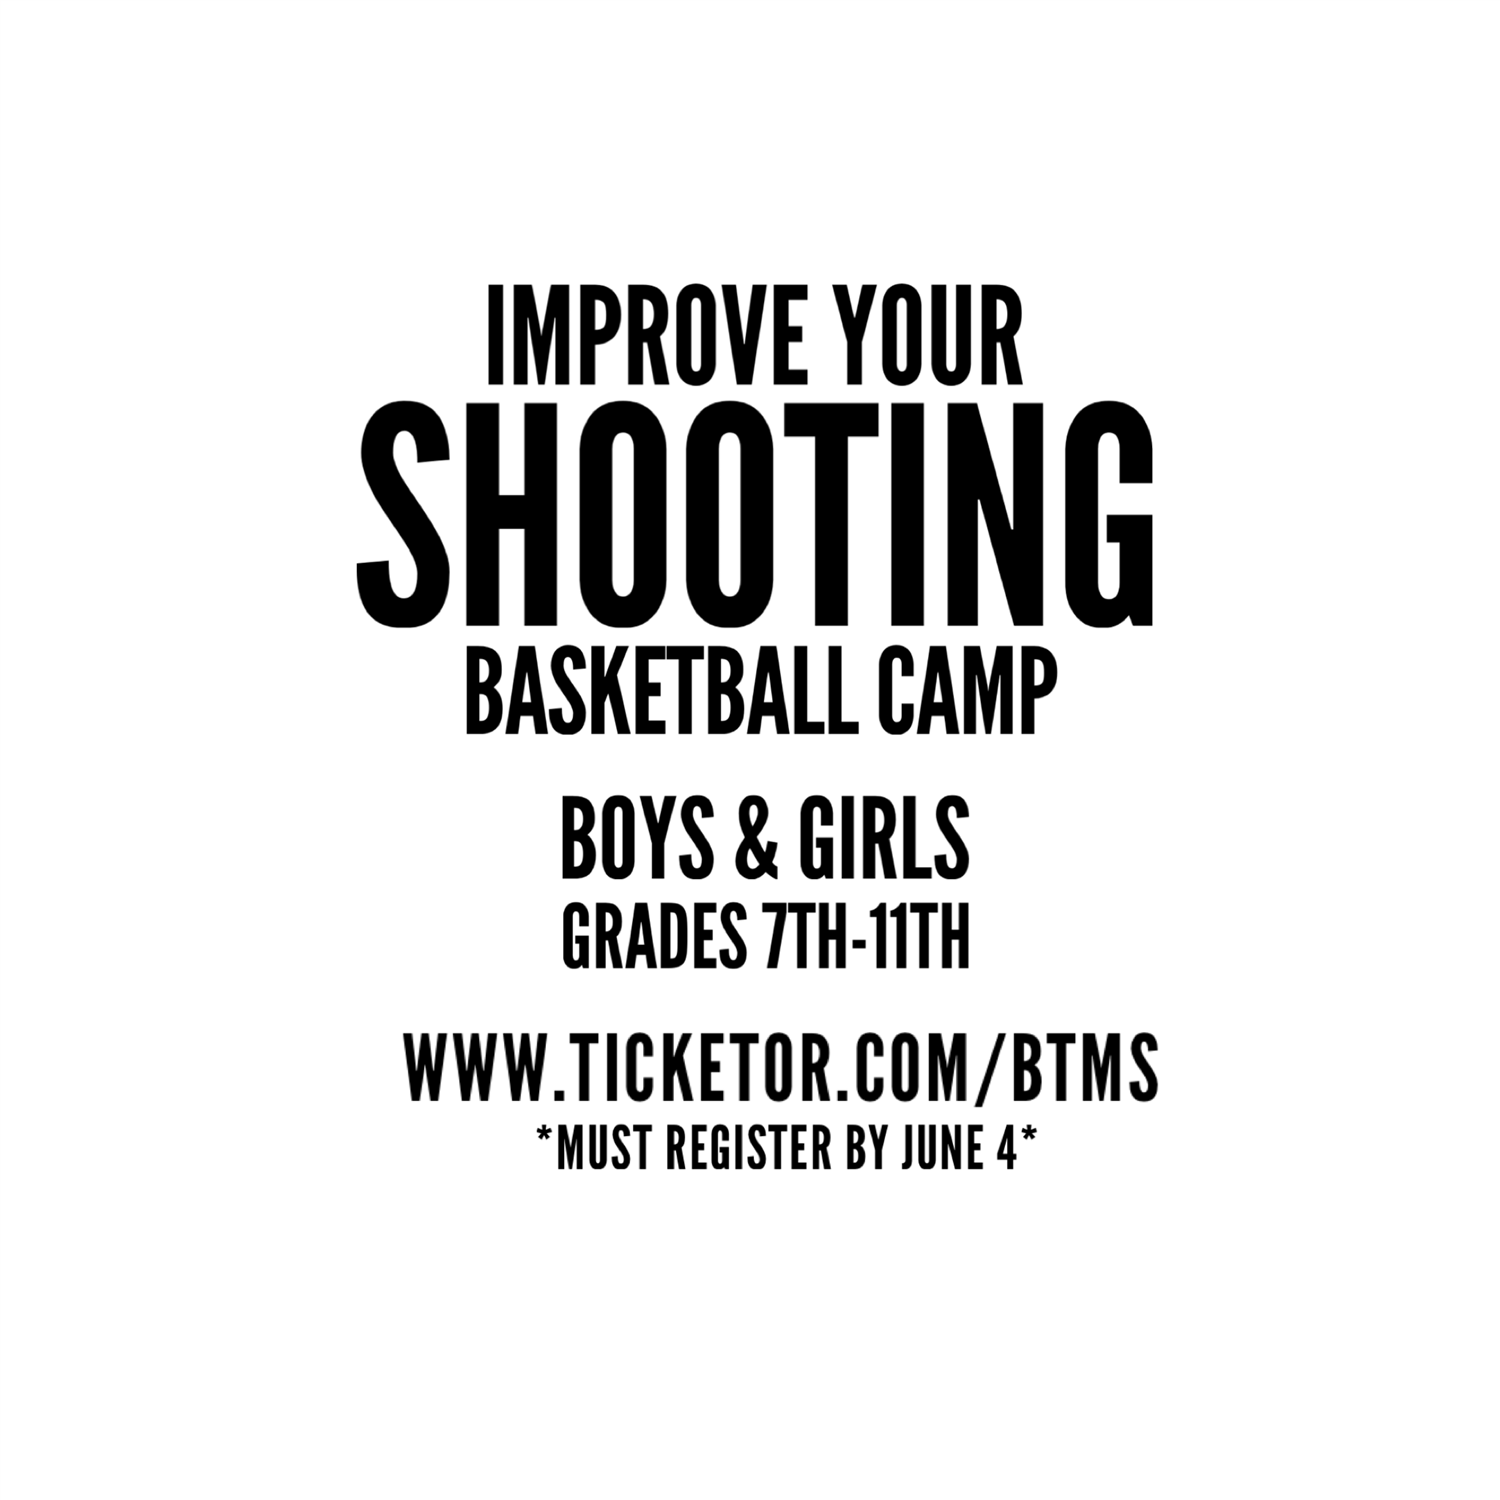 Improve Your Shooting Basketball Camp Boys & Girls Grades 7th-11th on Jun 05, 19:00@Moraine Valley - Buy tickets and Get information on BTMS LLC 